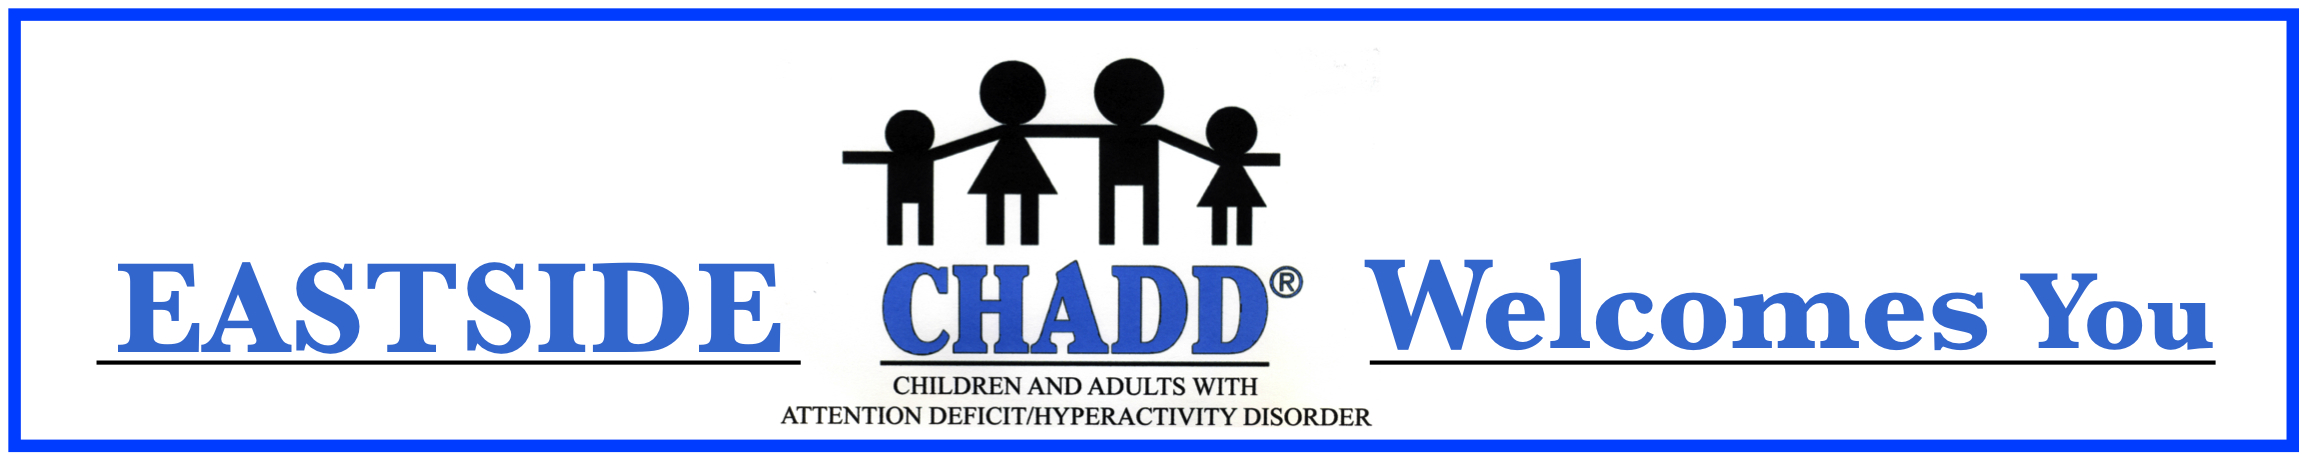 Eastside CHADD (Children and Adults with Attention Deficit-Hyperactivity Disorder